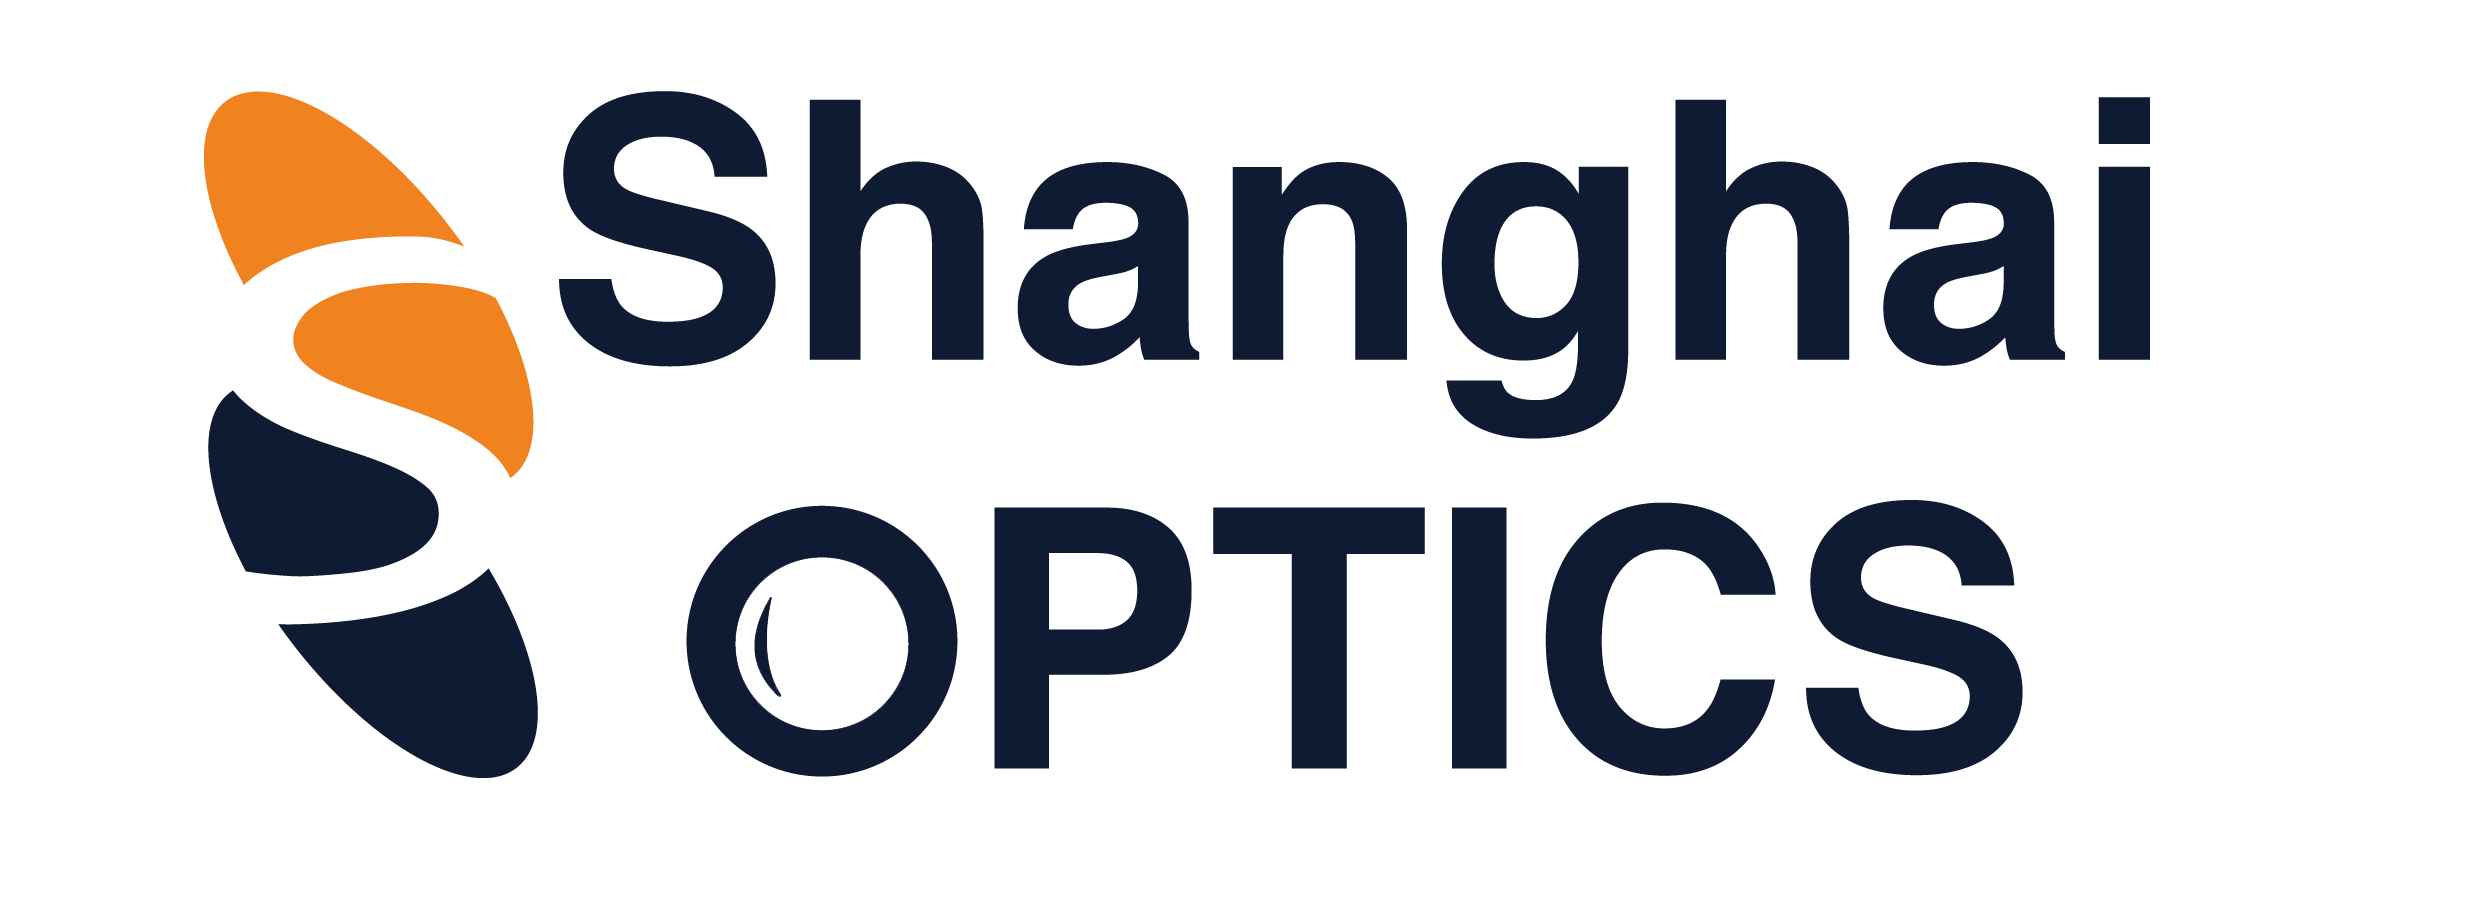 We are excited to announce that Shanghai Optics will be a Platinum Sponsor for Pillar Care Elementary School’s Wheelin’-n’-Walkin’ Challenge on May 28th. All funds raised from the event will support projects that have a direct impact on our students with severe disabilities and medical challenges. Thank you Shanghai Optics for your generosity and leadership!